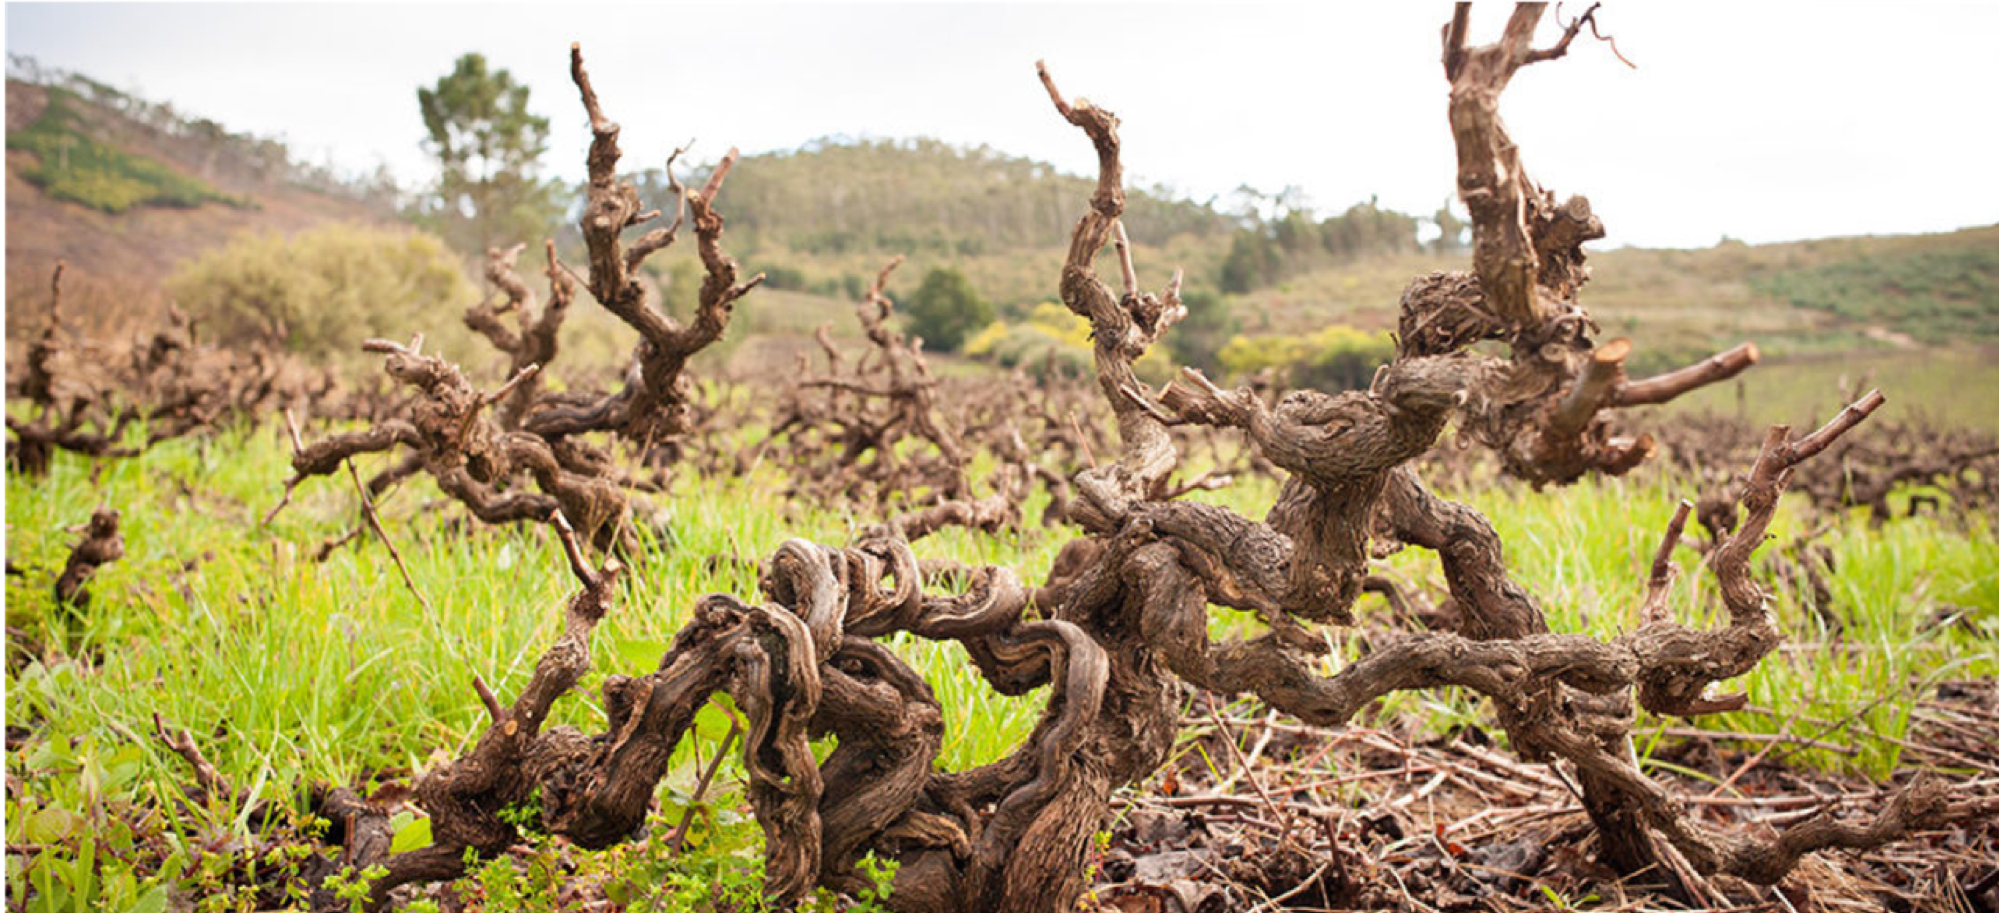 OLD VINES GIVE SA A SHOT TO MAKE IT INTO THE NEW WORLD ICON’S LEAGUE | MICHAEL FRIDJHON